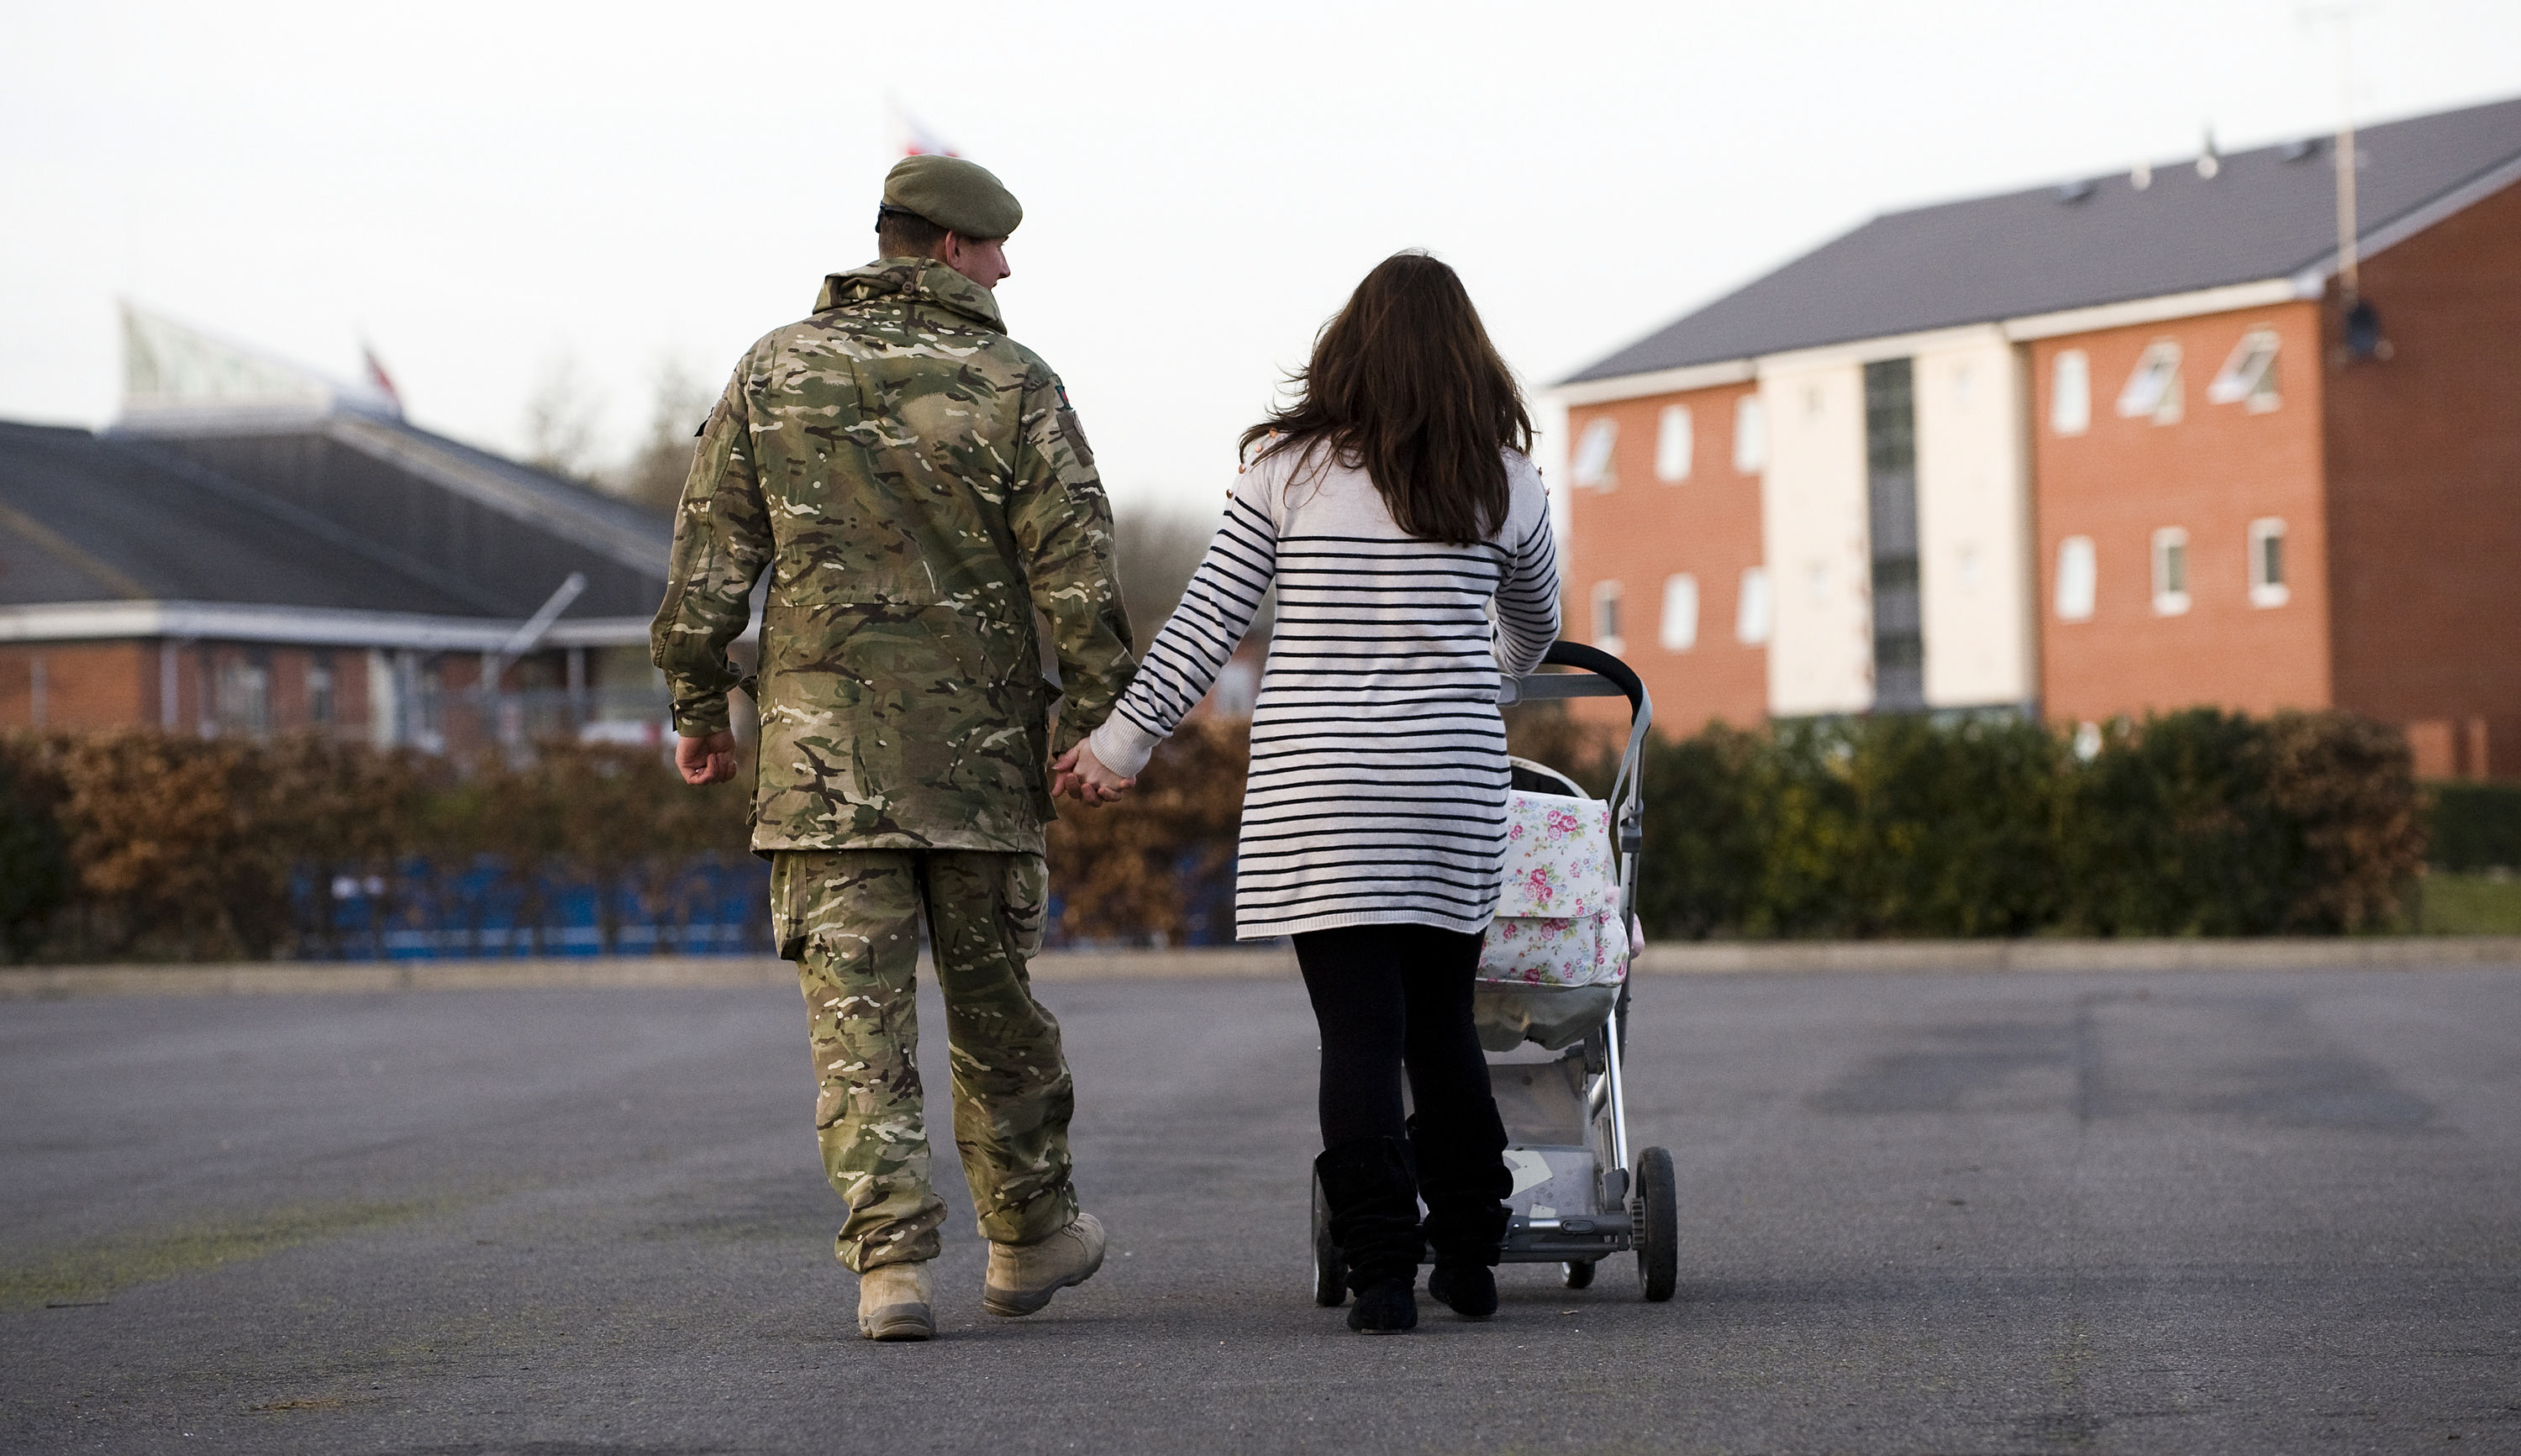 A soldier returned safely from Afghanistan, heads home with his family.